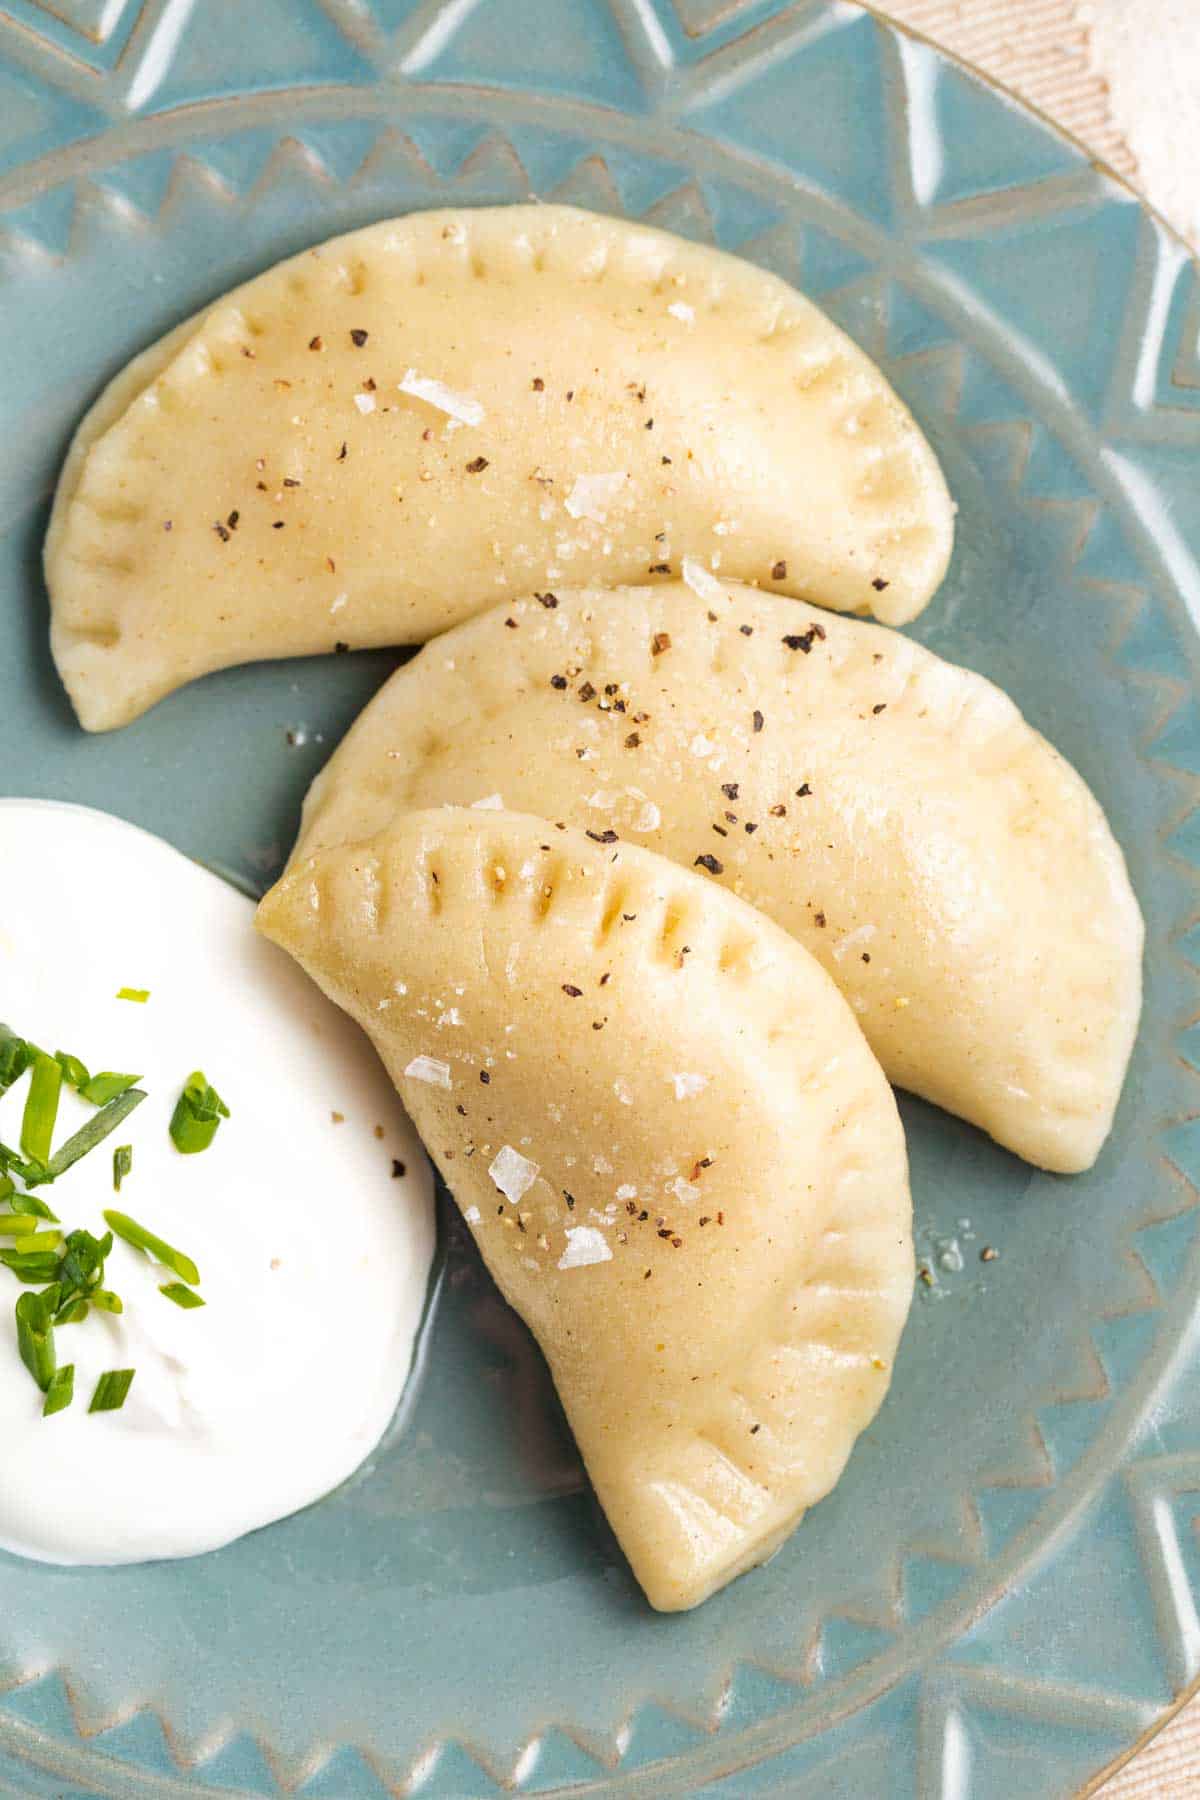 Three pierogi are shown on a blue plate, with salt and pepper visible on their tops. Next to the pierogi is a spoonful of sour cream topped with chopped parsley.